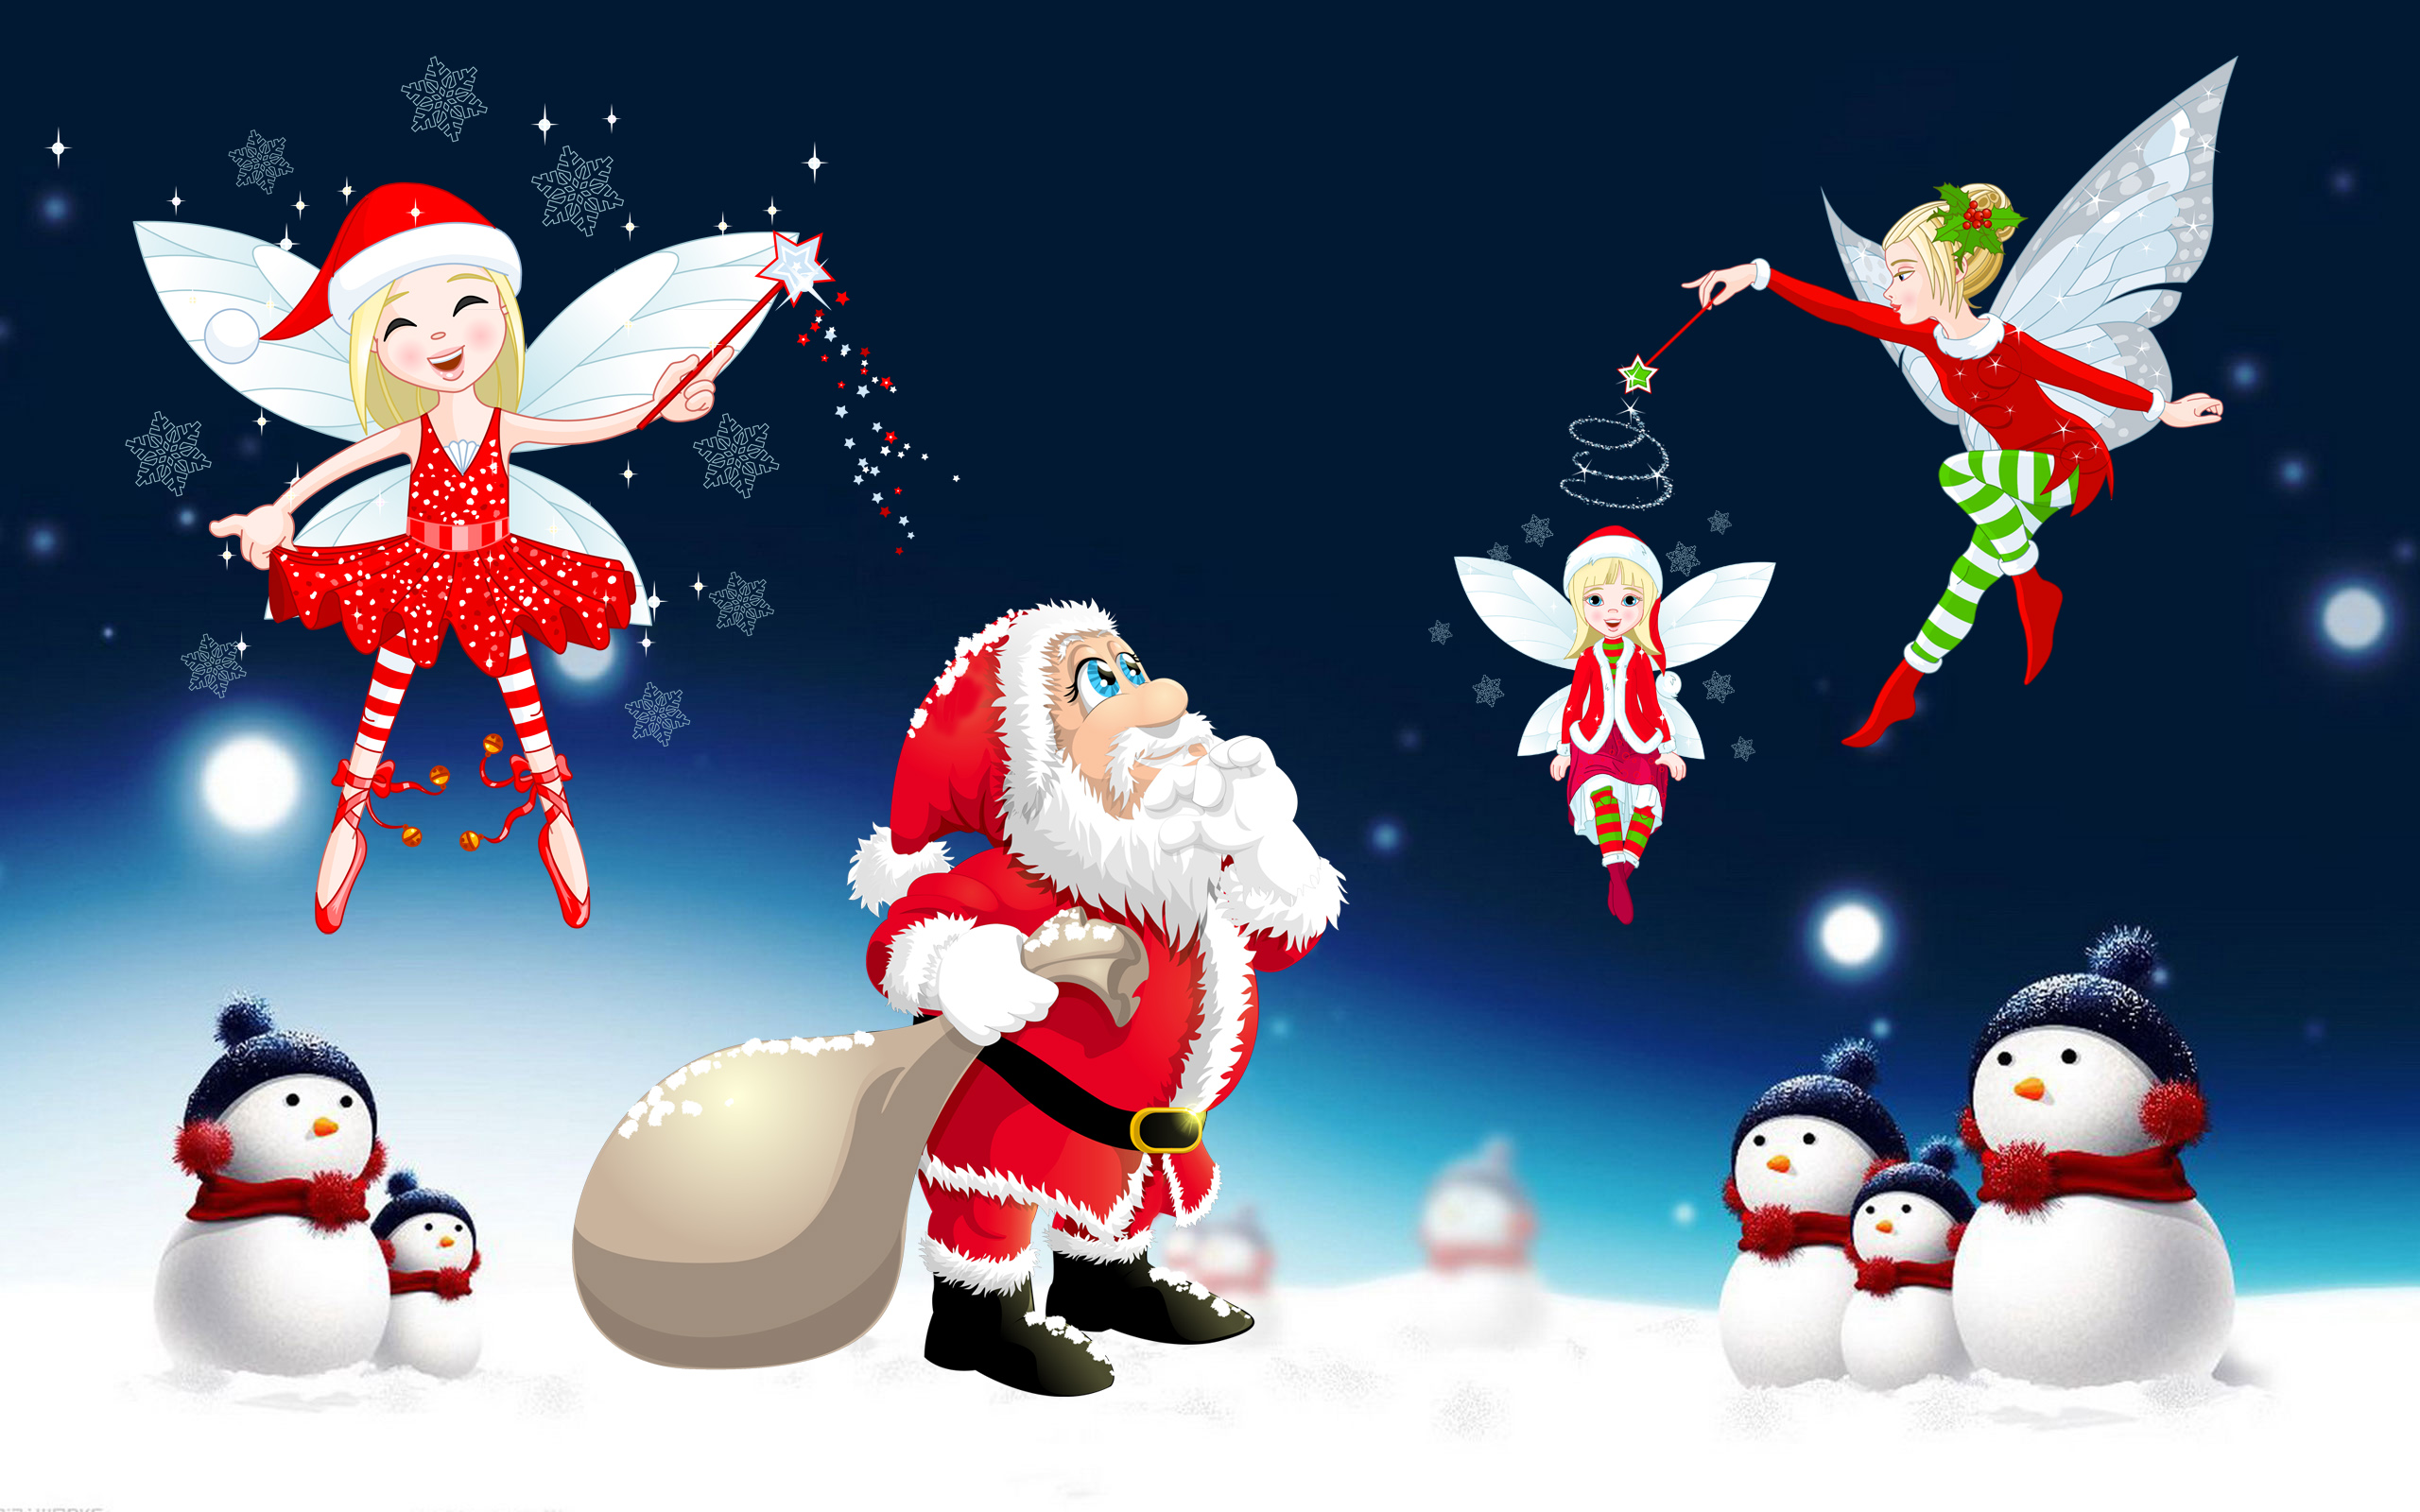 Merry Christmas Santa Claus Desktop Hd Wallpaper For Mobile Phones Tablet  And Pc 2560x1600 : 